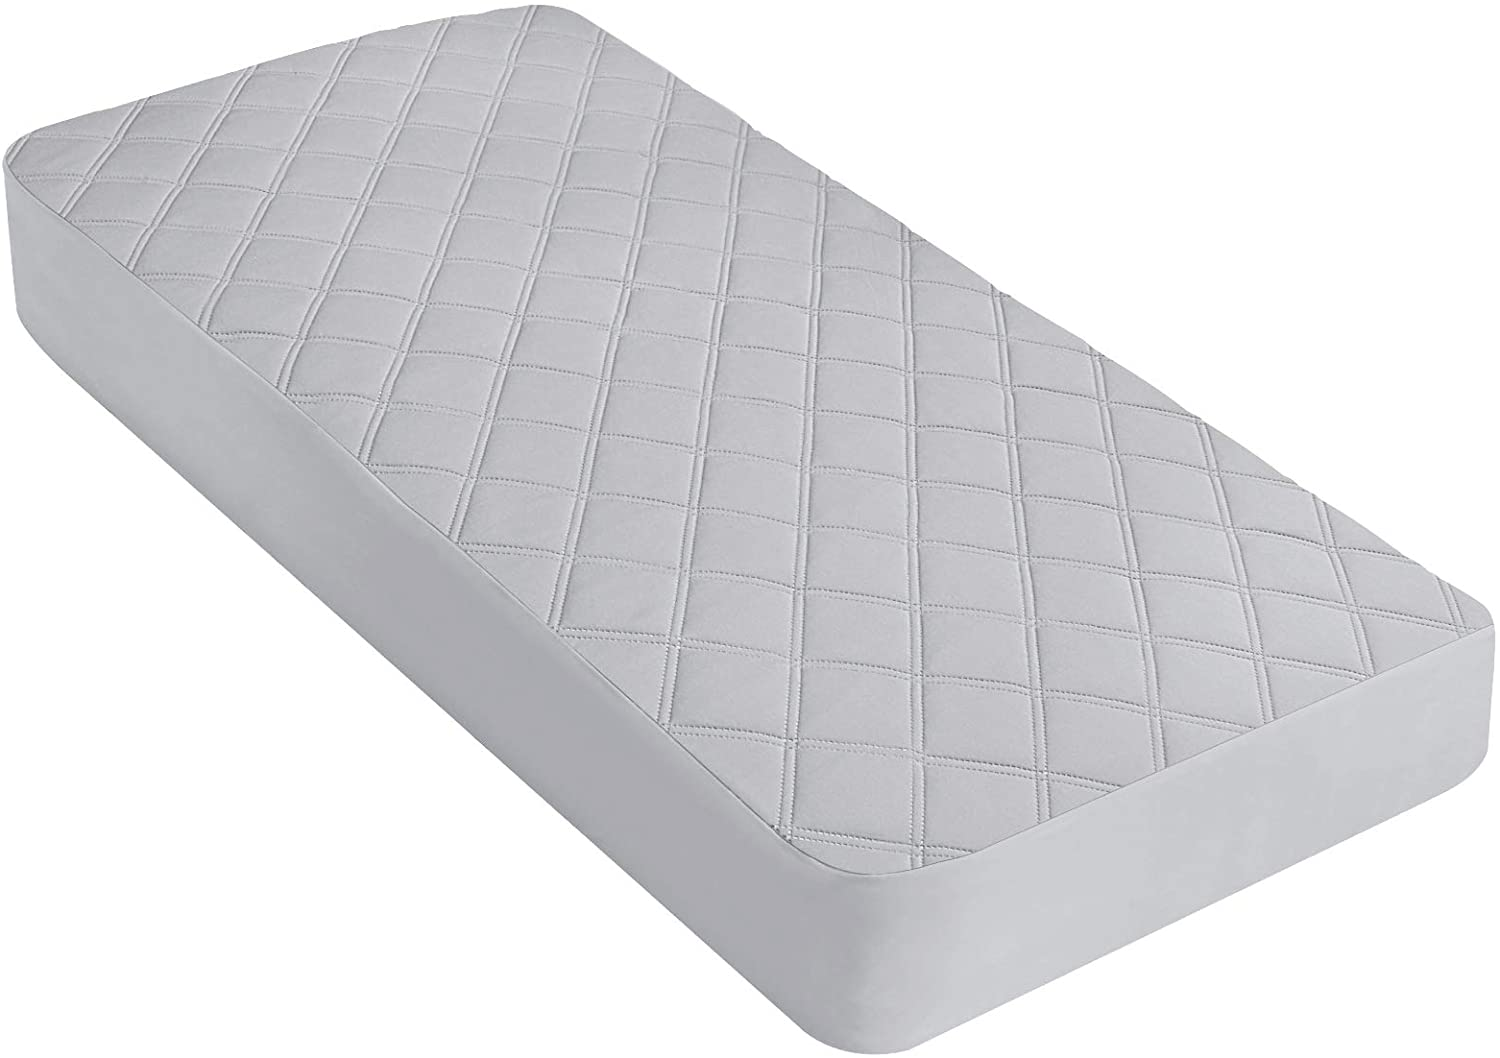 Customized Specification Ultrasonic Crib Mattress Protector Cover